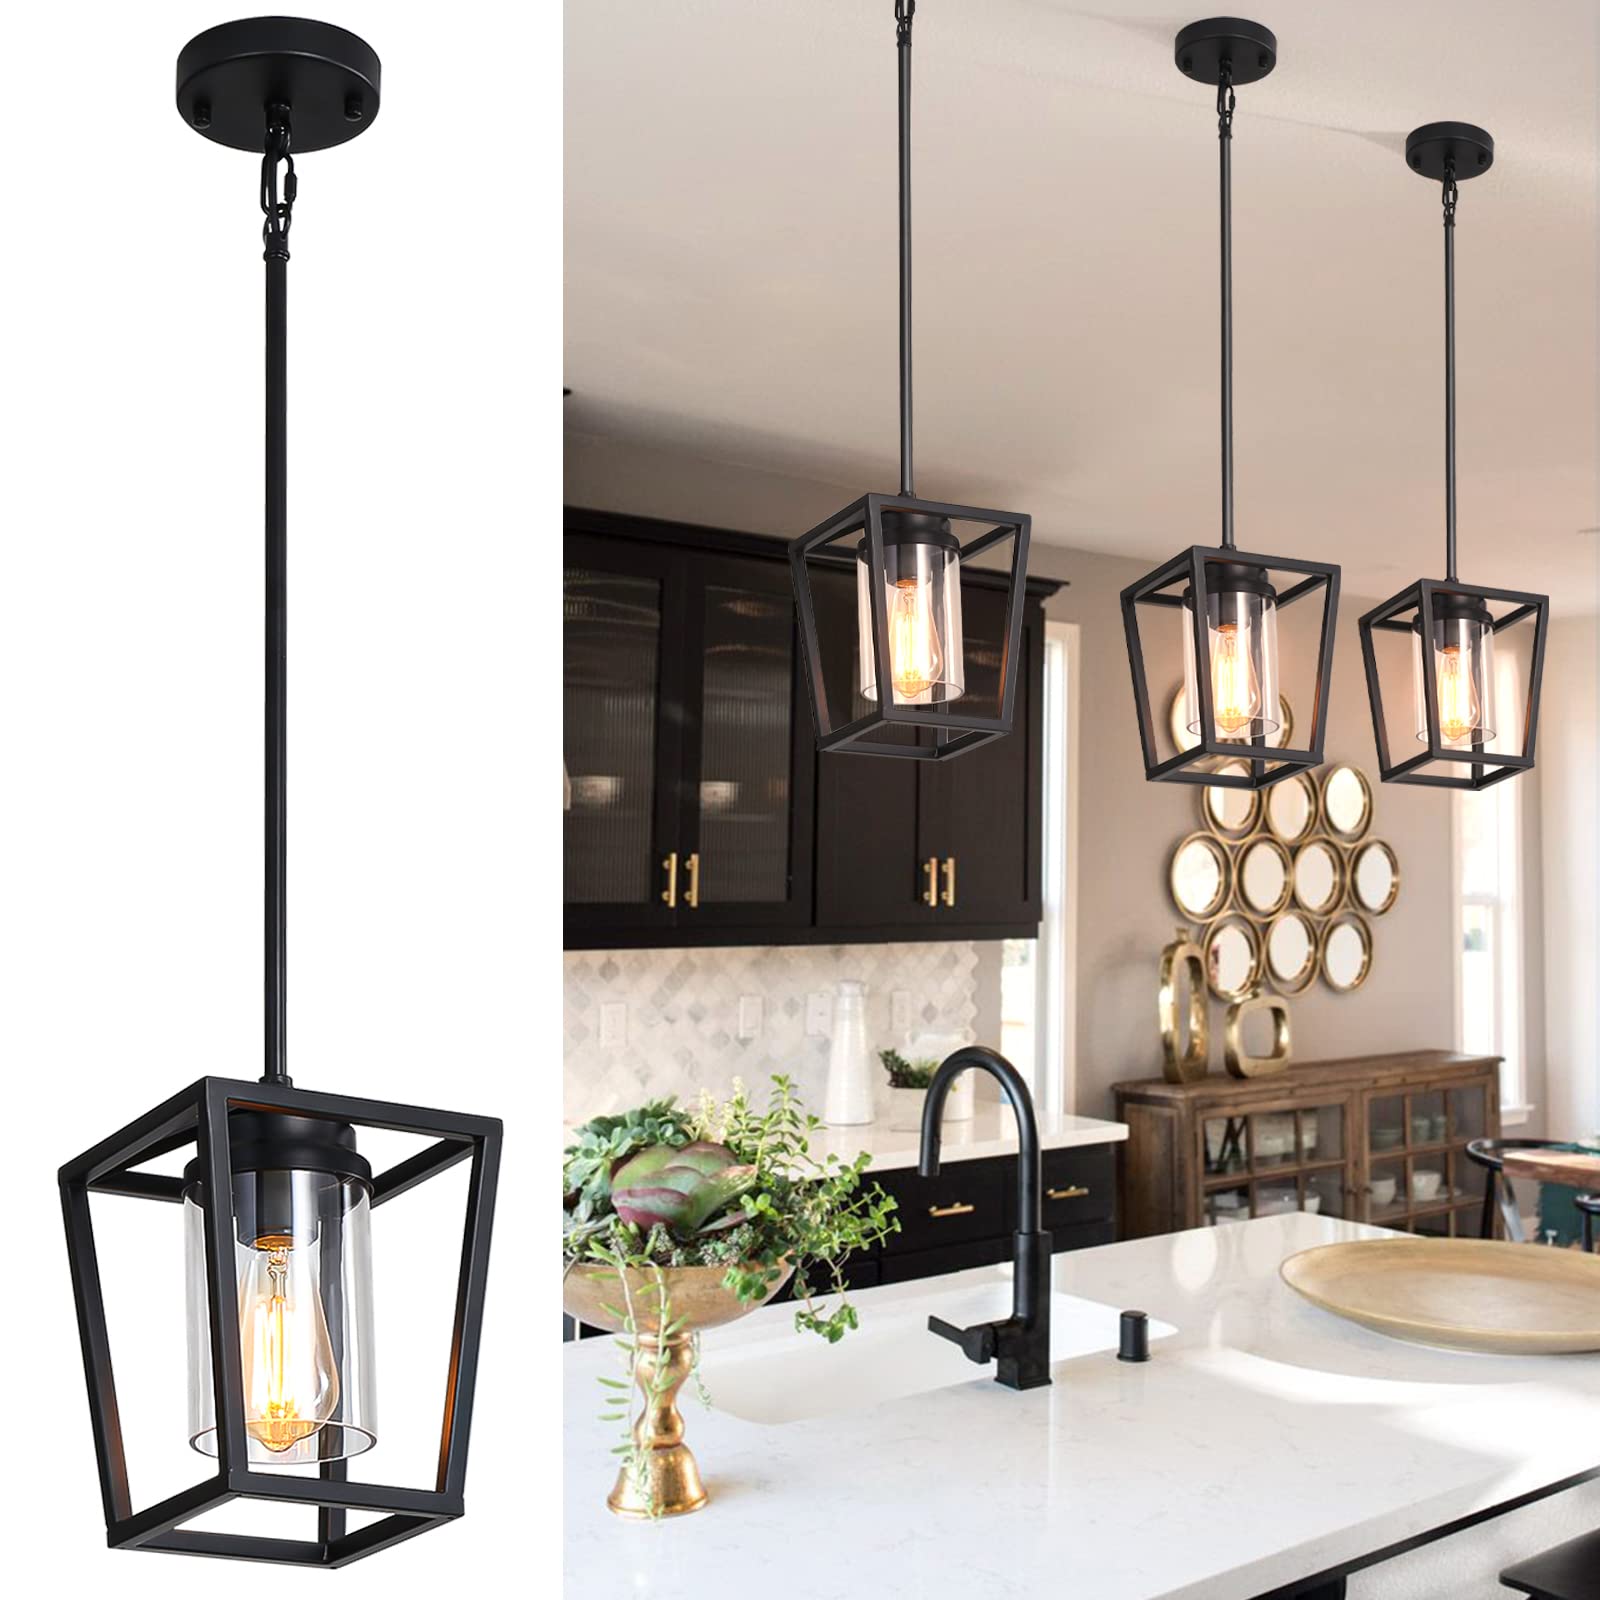 Installing kitchen island light fixtures is an exciting way to enhance the ambiance and functionality of your culinary space.